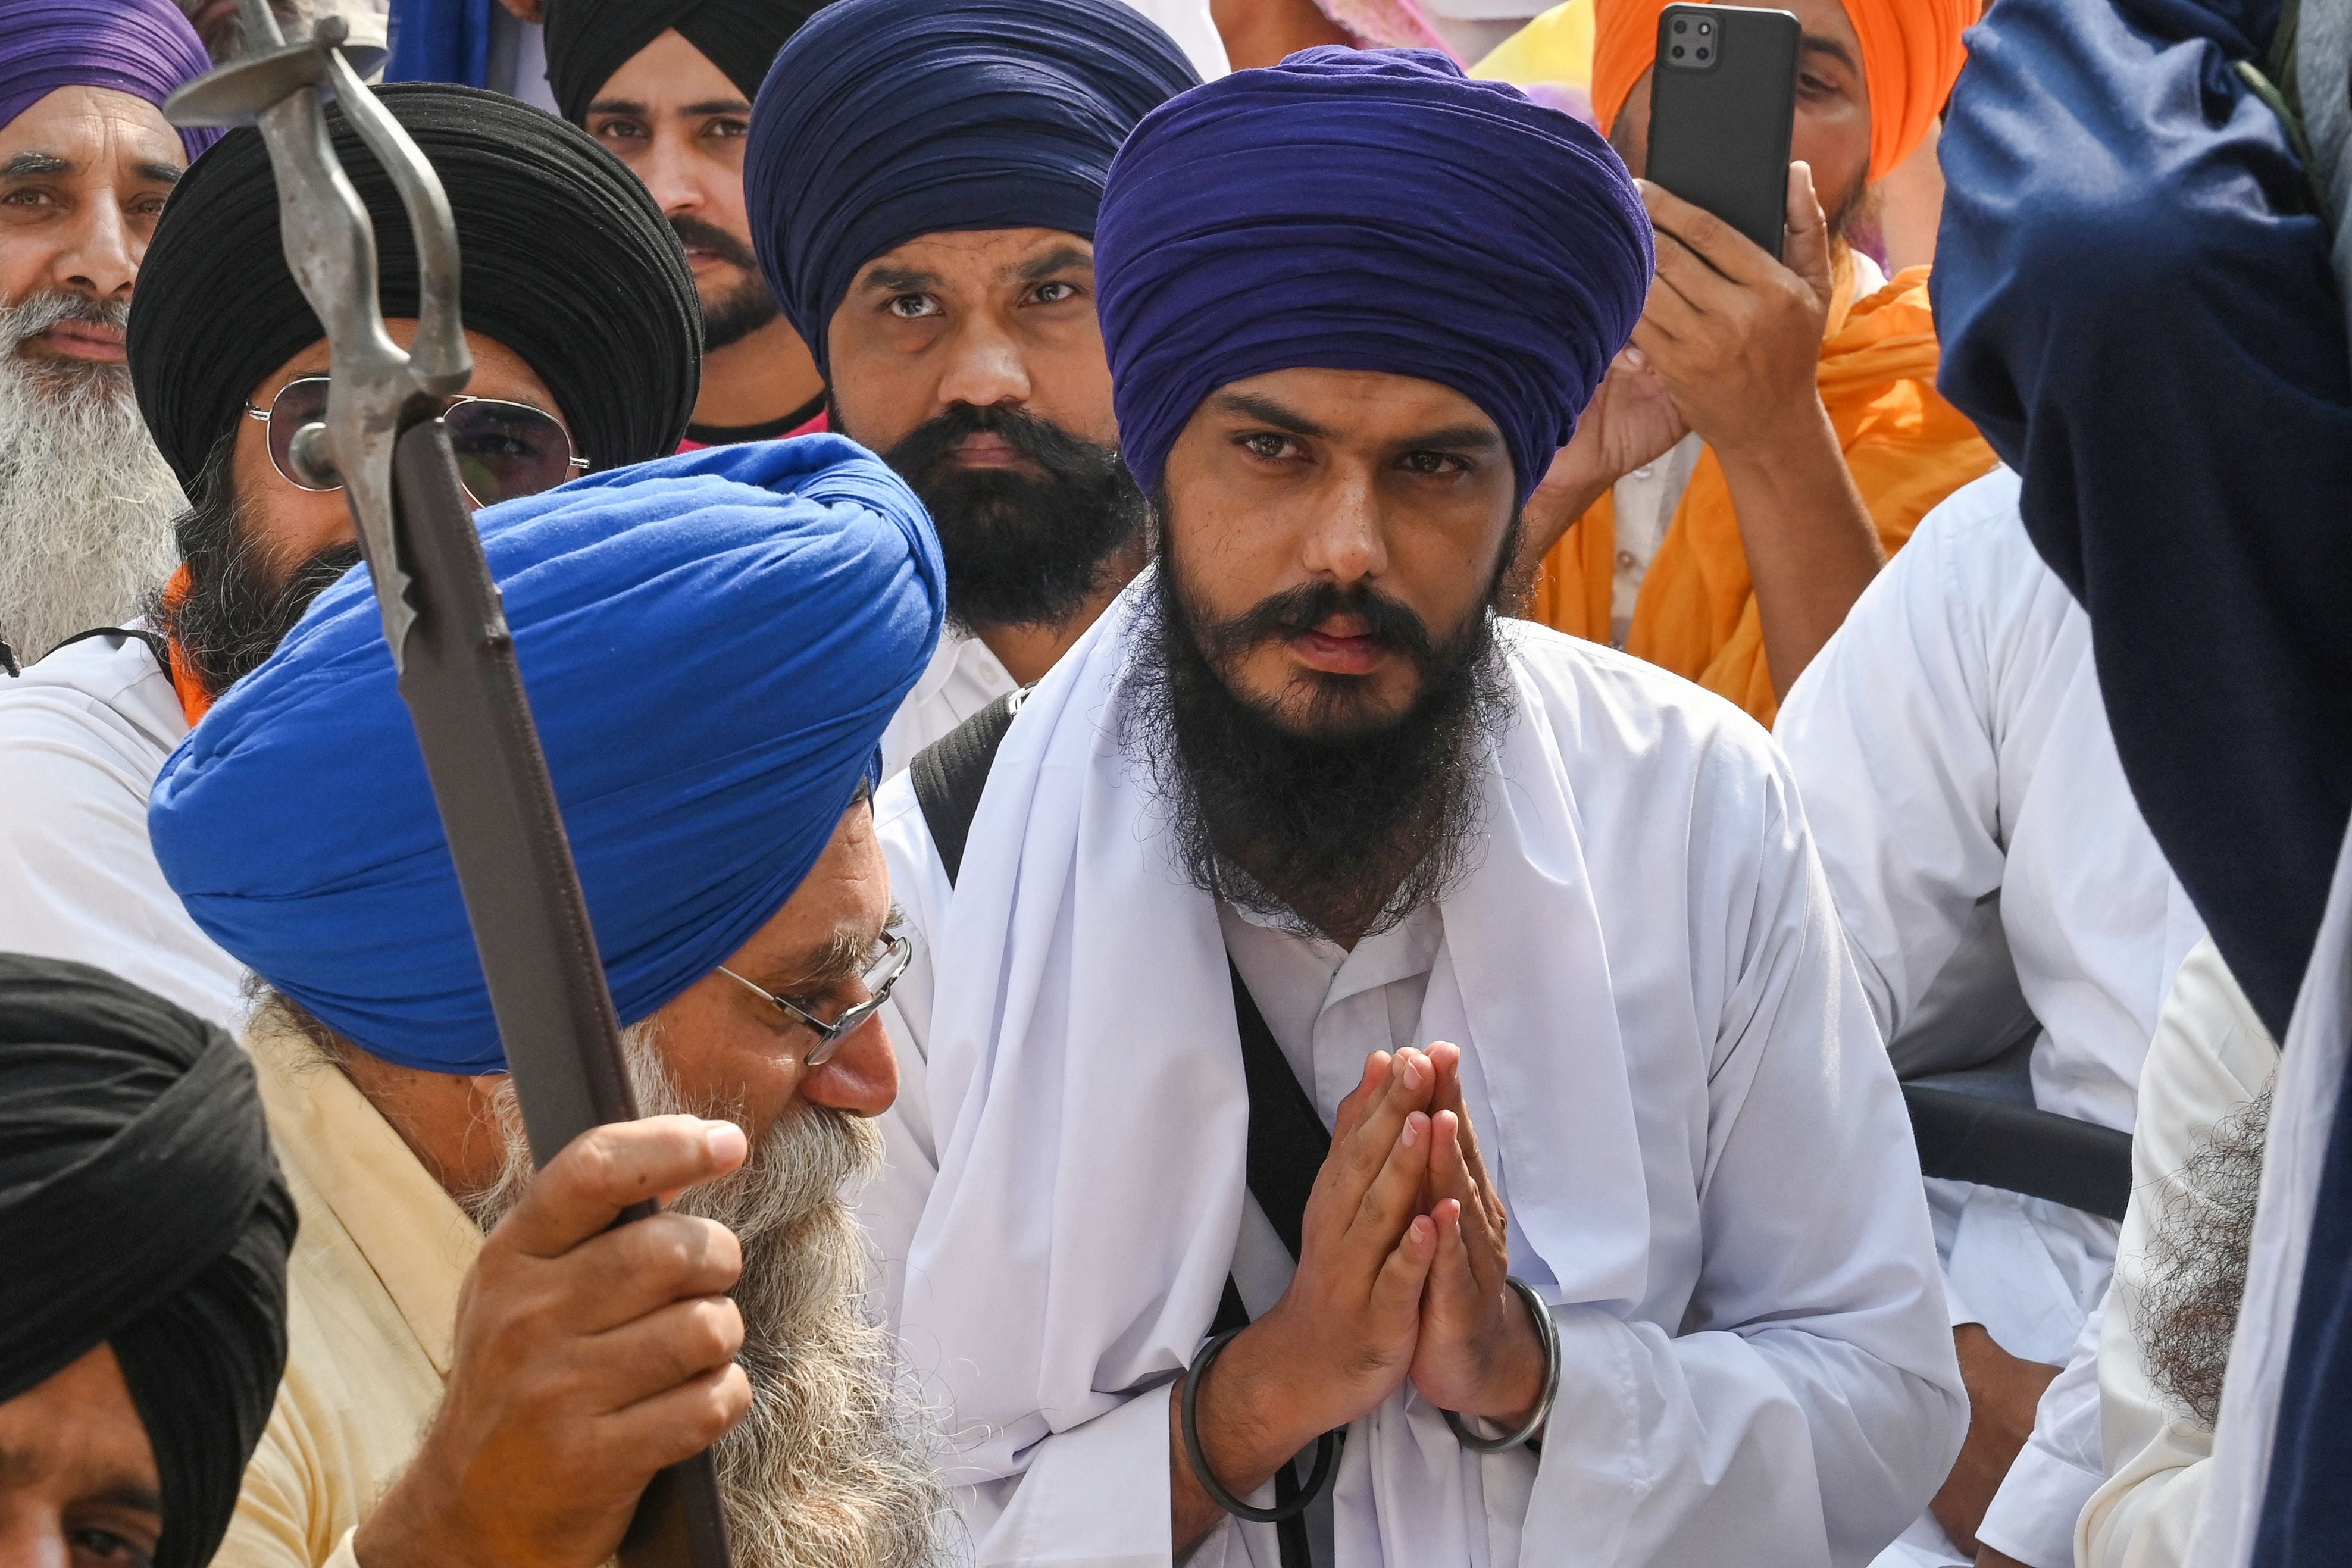 File image: Chief of a social organisation, Amritpal Singh (C) along with devotees takes part in a Sikh initiation rite ceremony